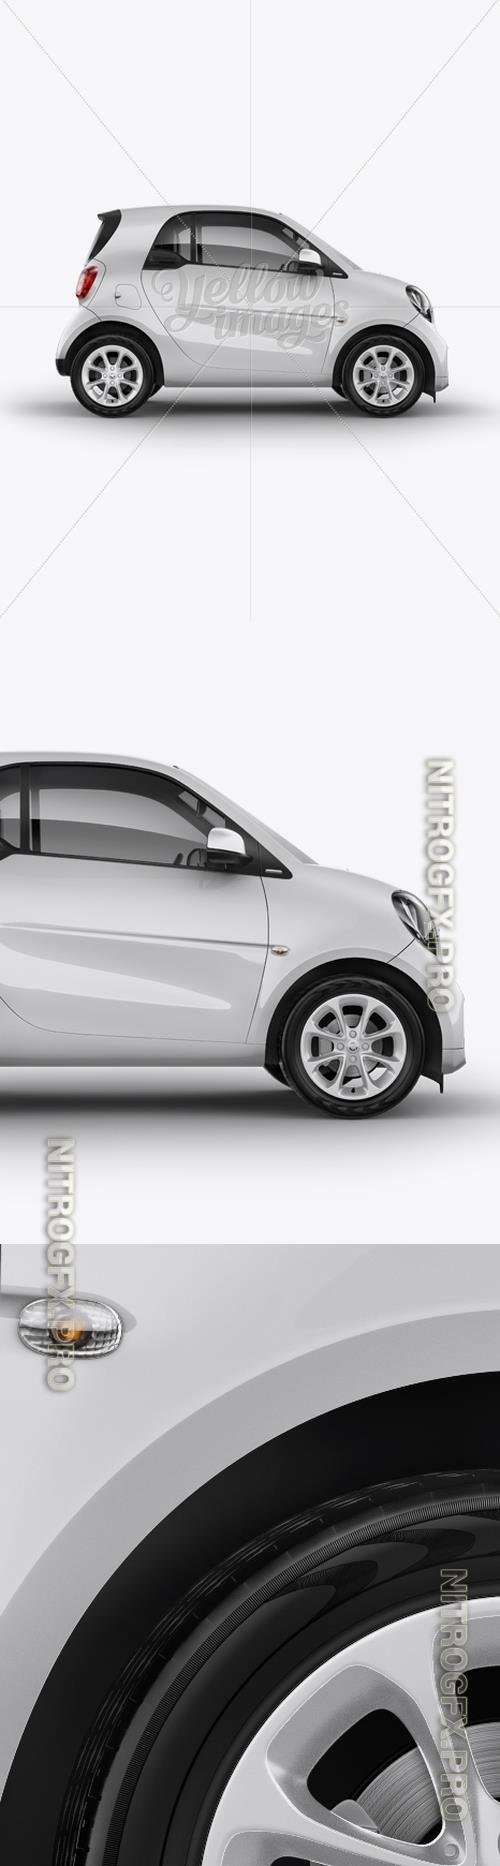 Smart Fortwo Mockup - Side View - 14045